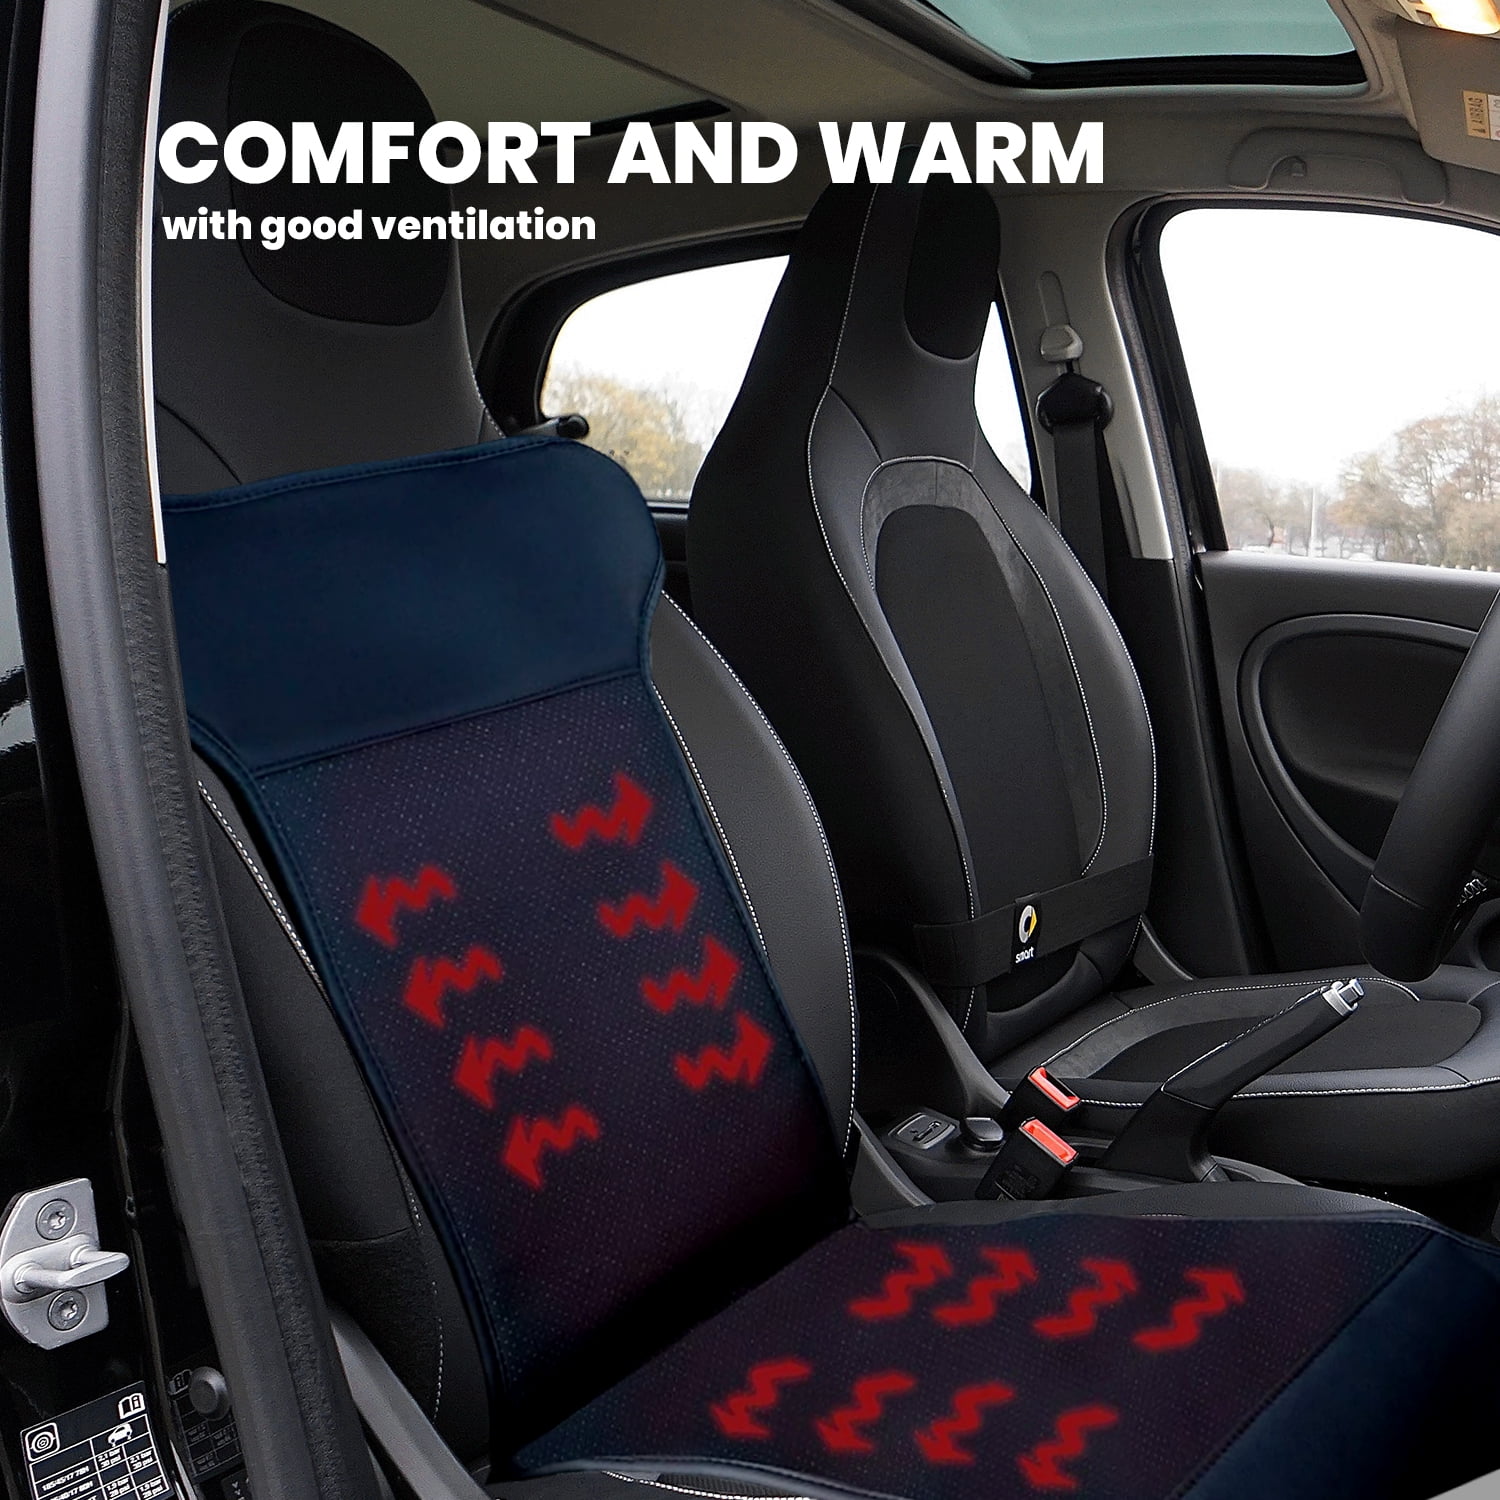 Up To 38% Off on Zone Tech Car Heated Seat Cus